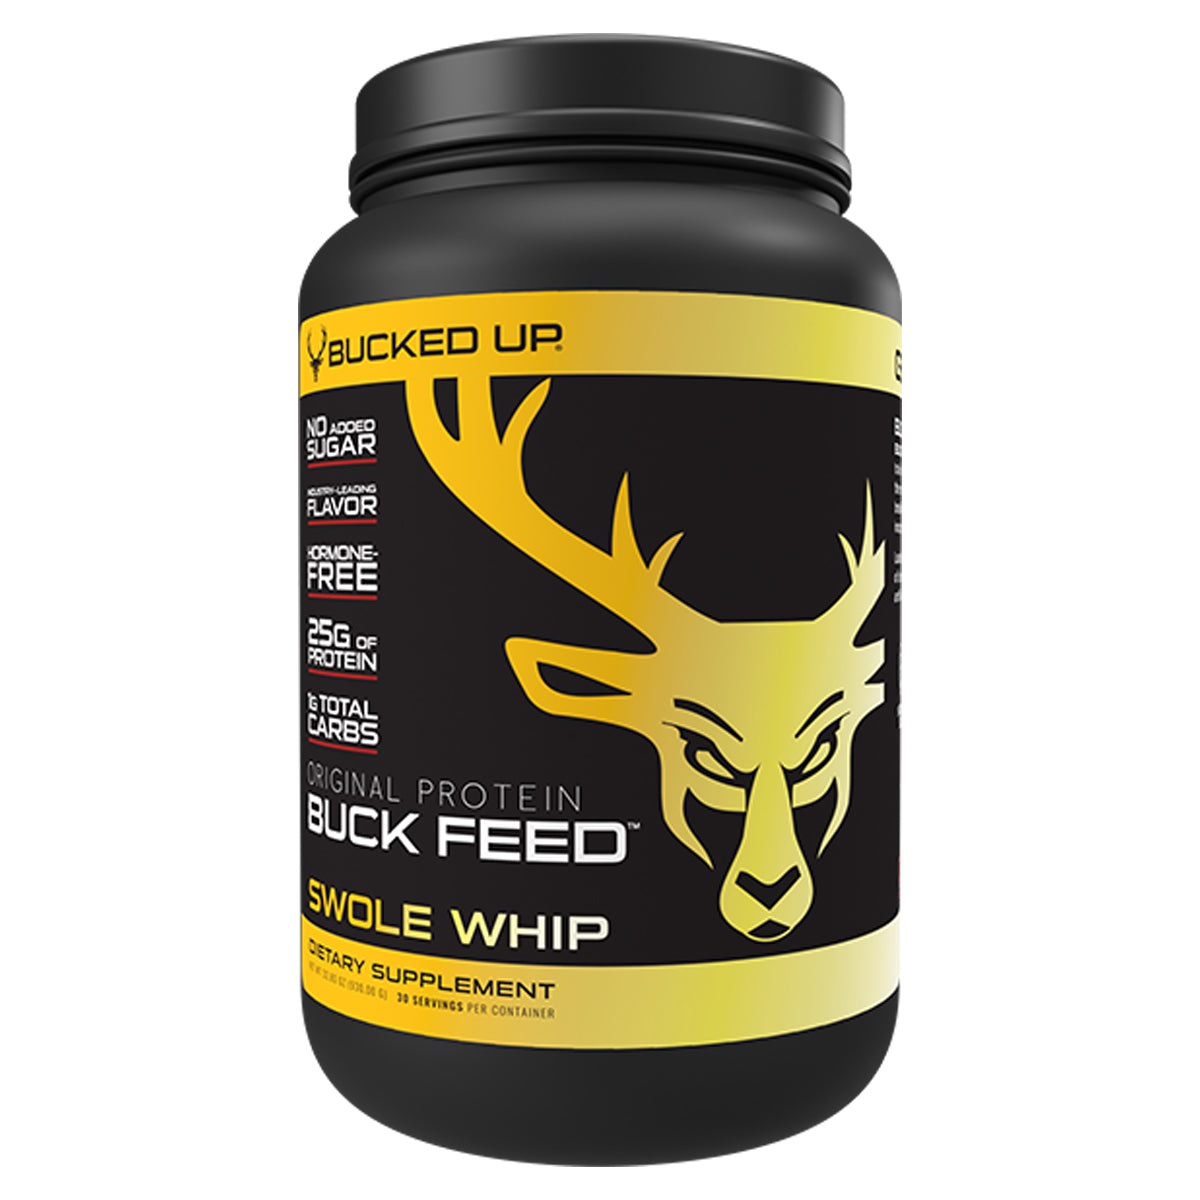 Bucked Up Buck Feed Original Protein in  by GOHUNT | Bucked Up - GOHUNT Shop